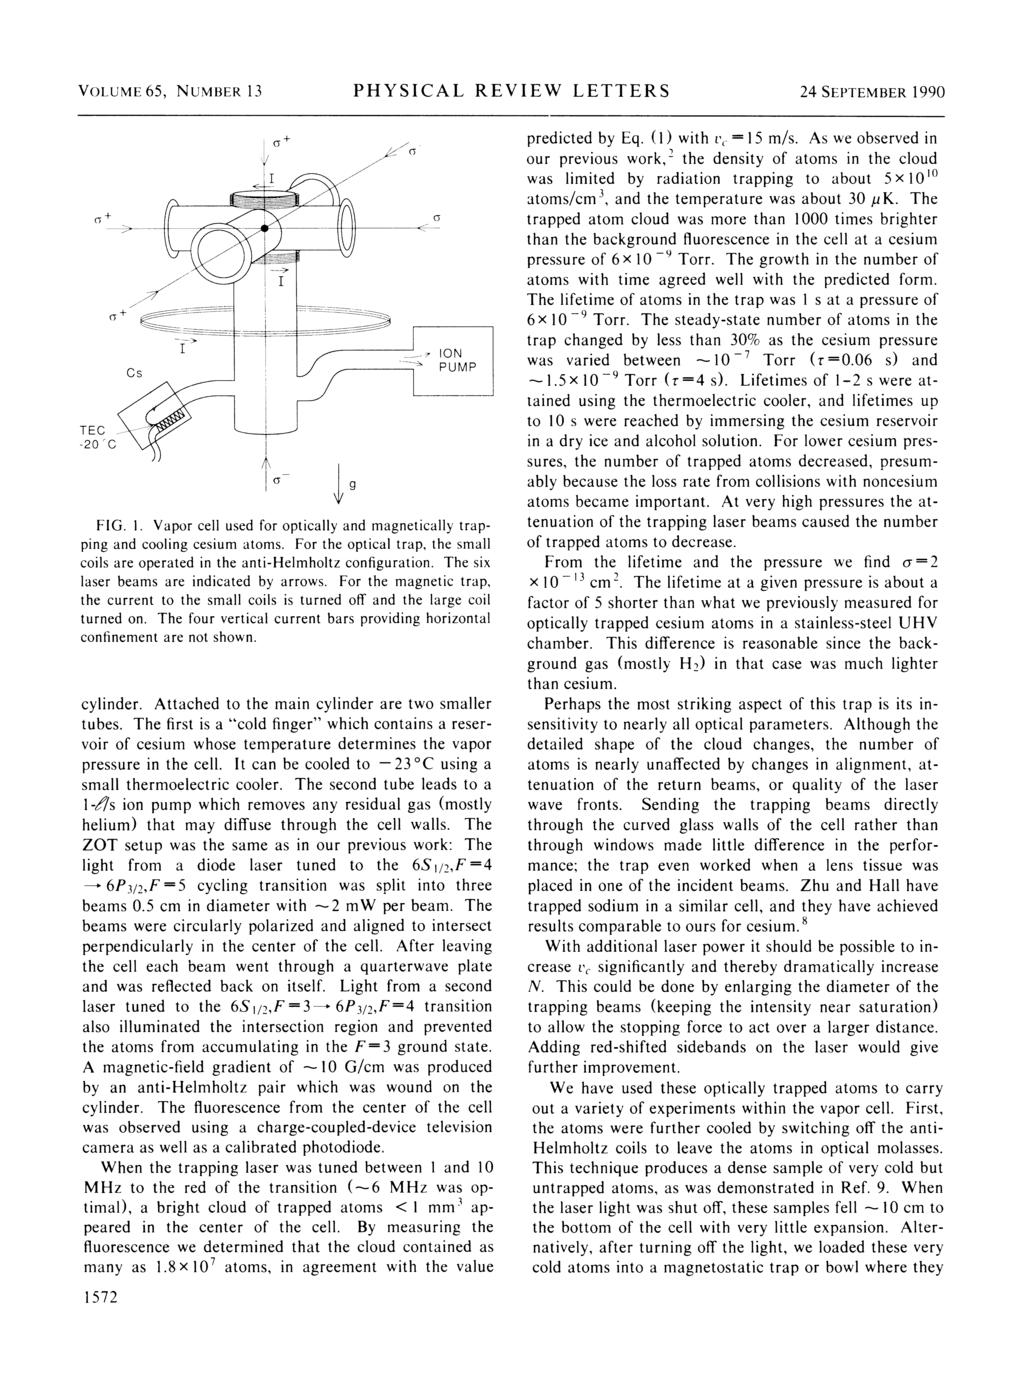 VOLUME 65, NUMBER 13 PHYSICAL REVIEW LETTERS 24 SEPTEMBER 1990 TEC -20 C Cs ION PUMP FIG. 1. Vapor cell used for optically and magneticall trap g ooling cesium atoms.